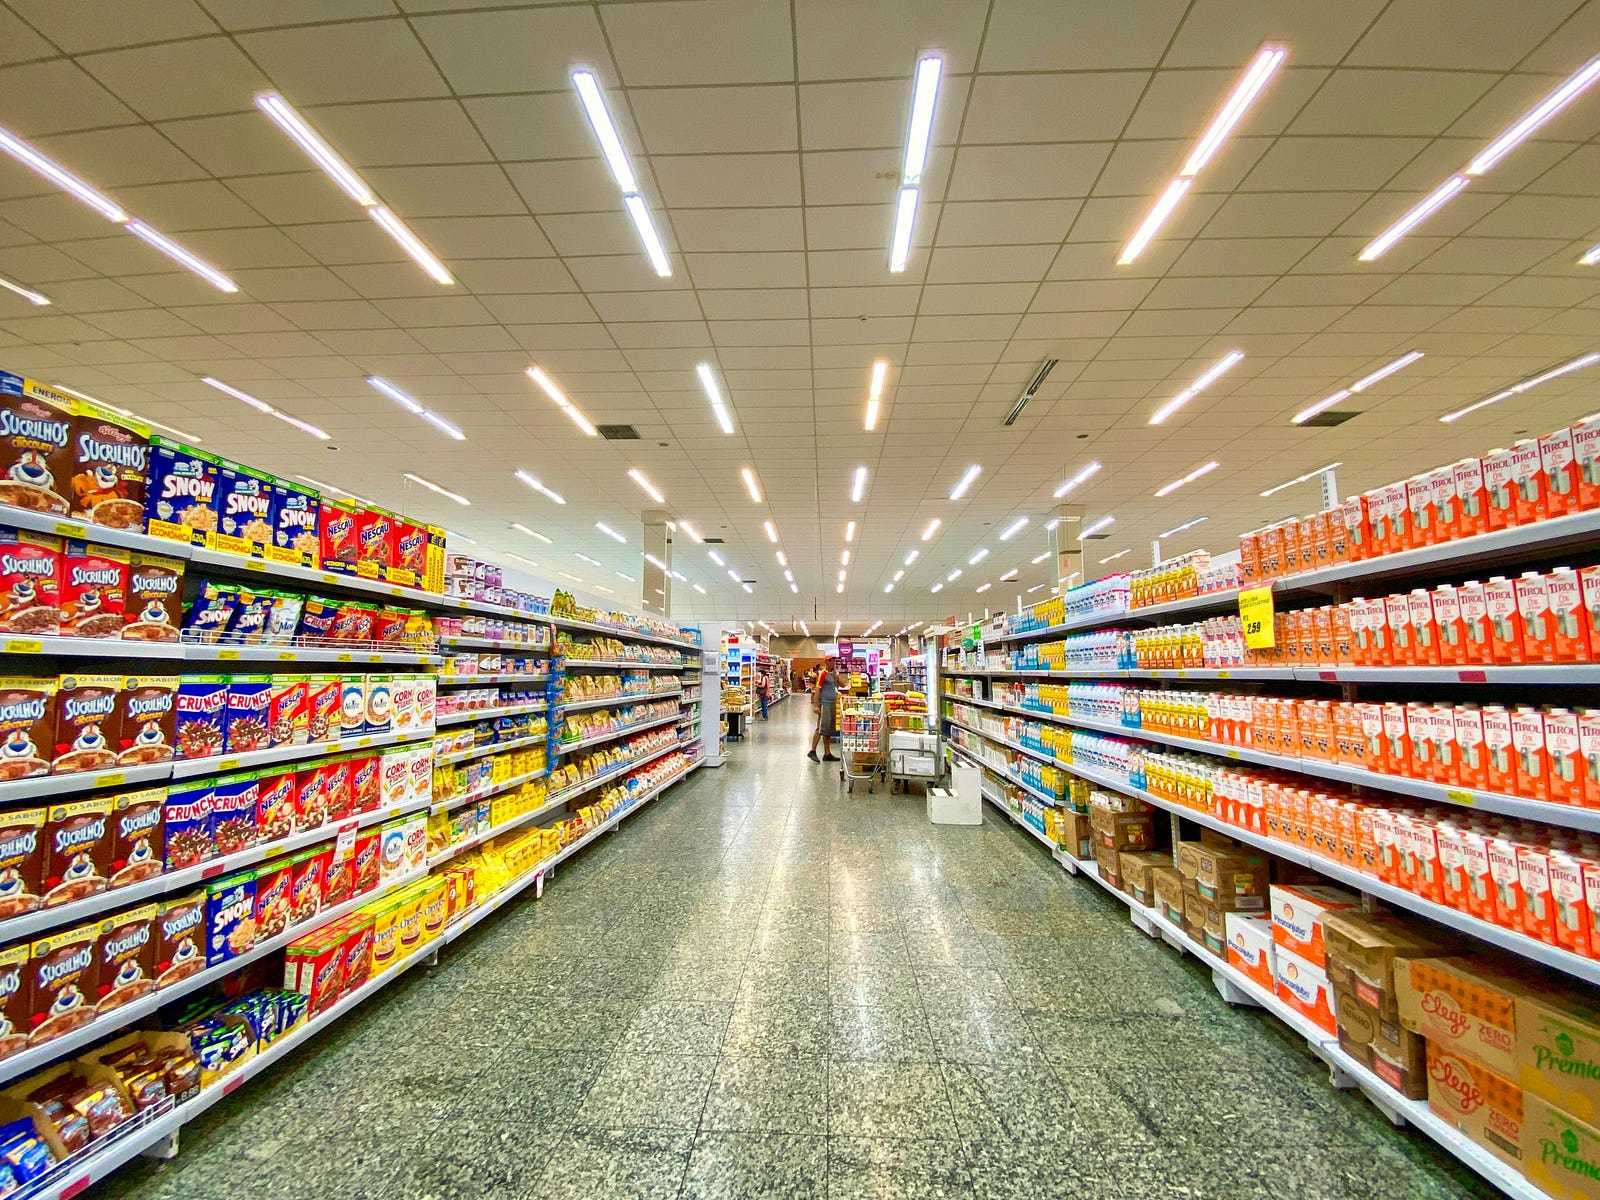 A single aisle of a grocery store, its shelves chock full of ultra-processed foods.